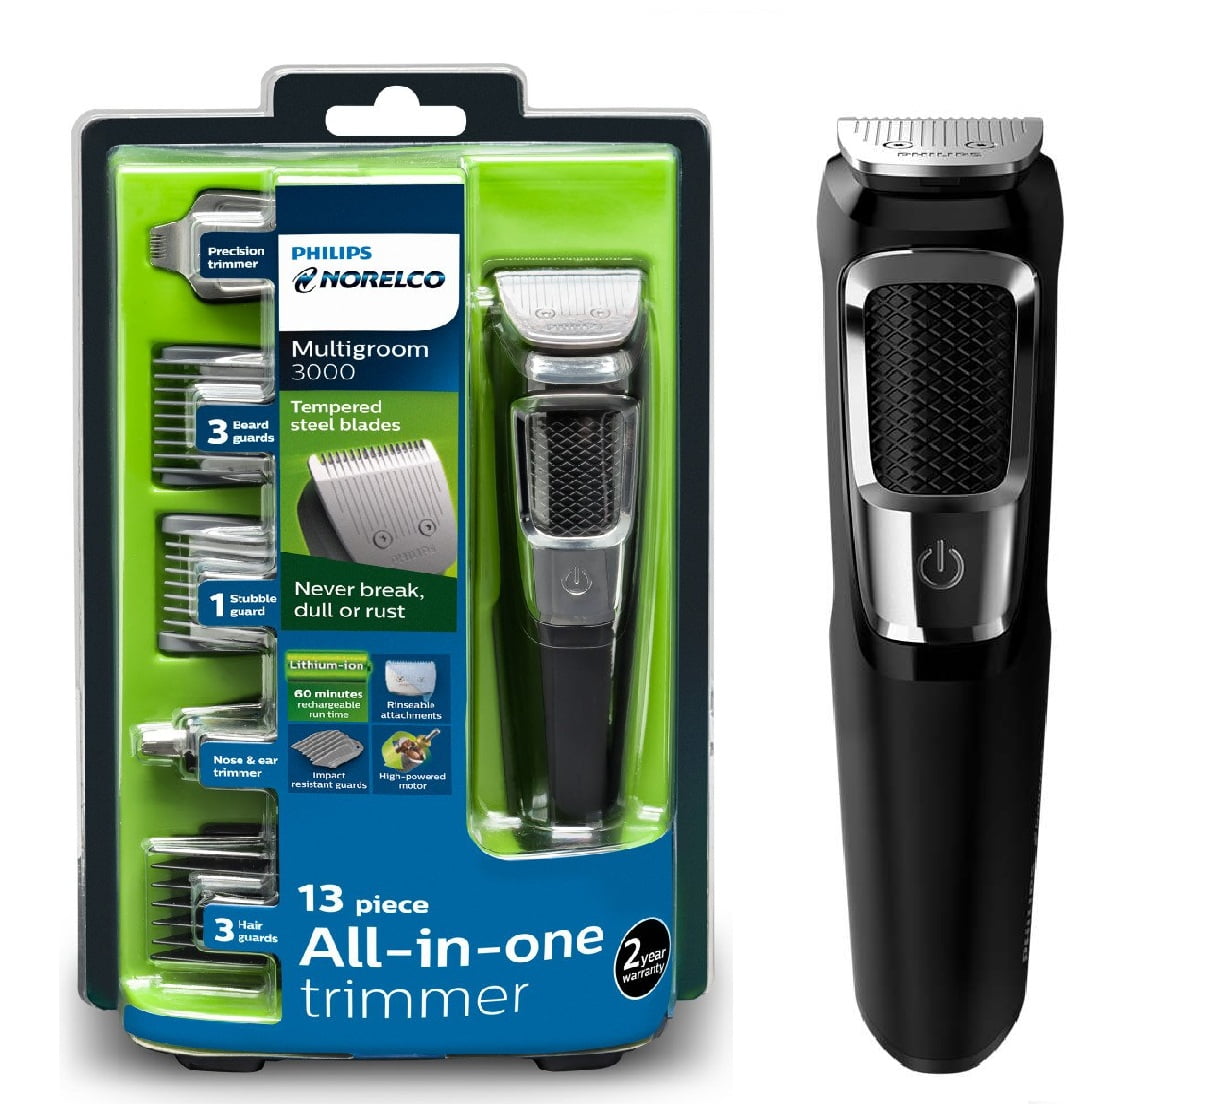 attachment Norelco Philips 3000, trimmer, MG3750 13 Series Multigroom All-In-One